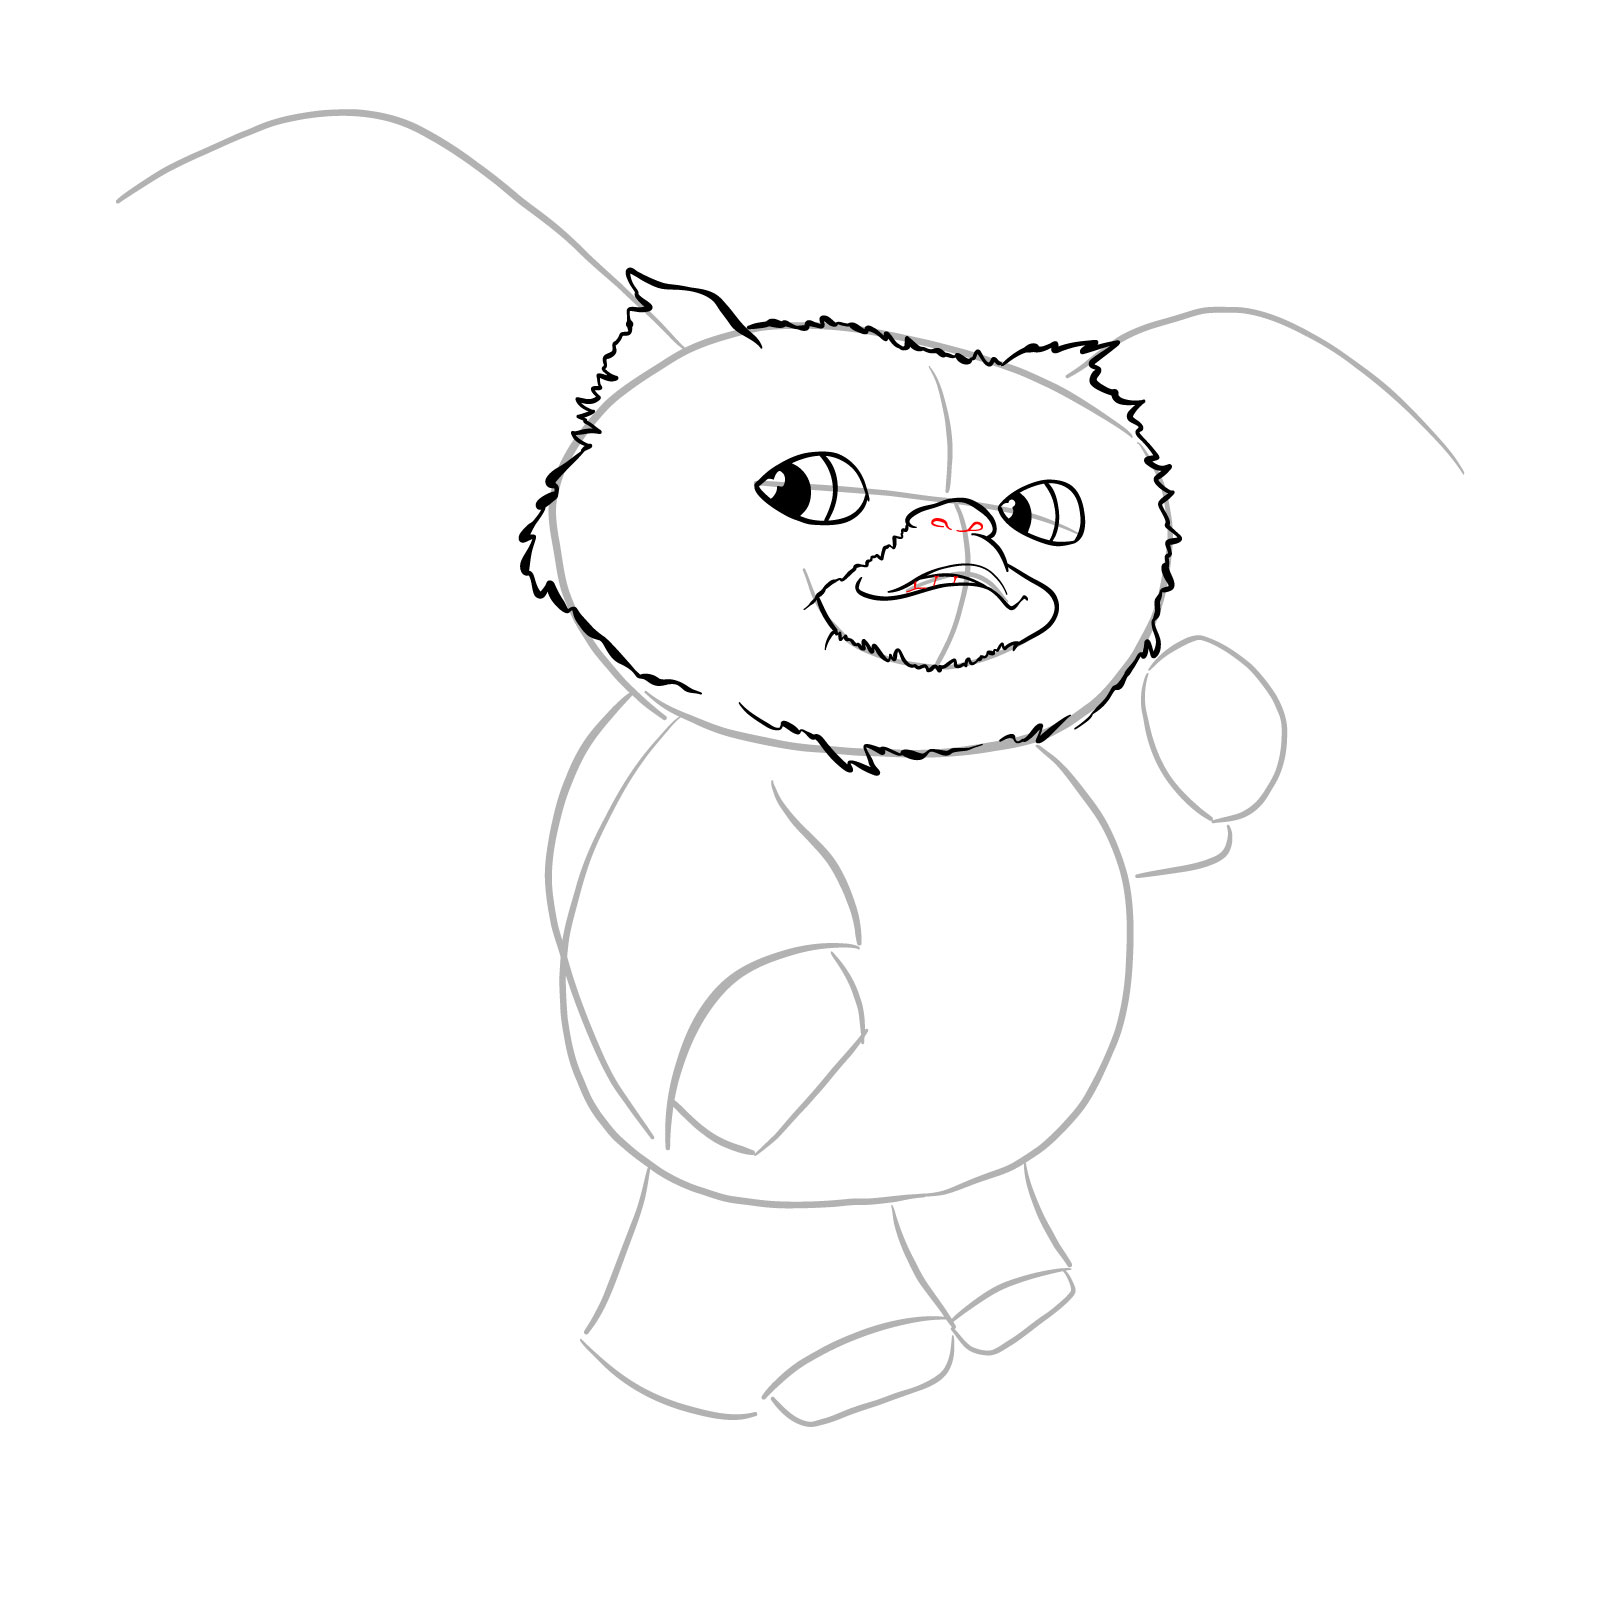 How to draw a Gremlin - step 13